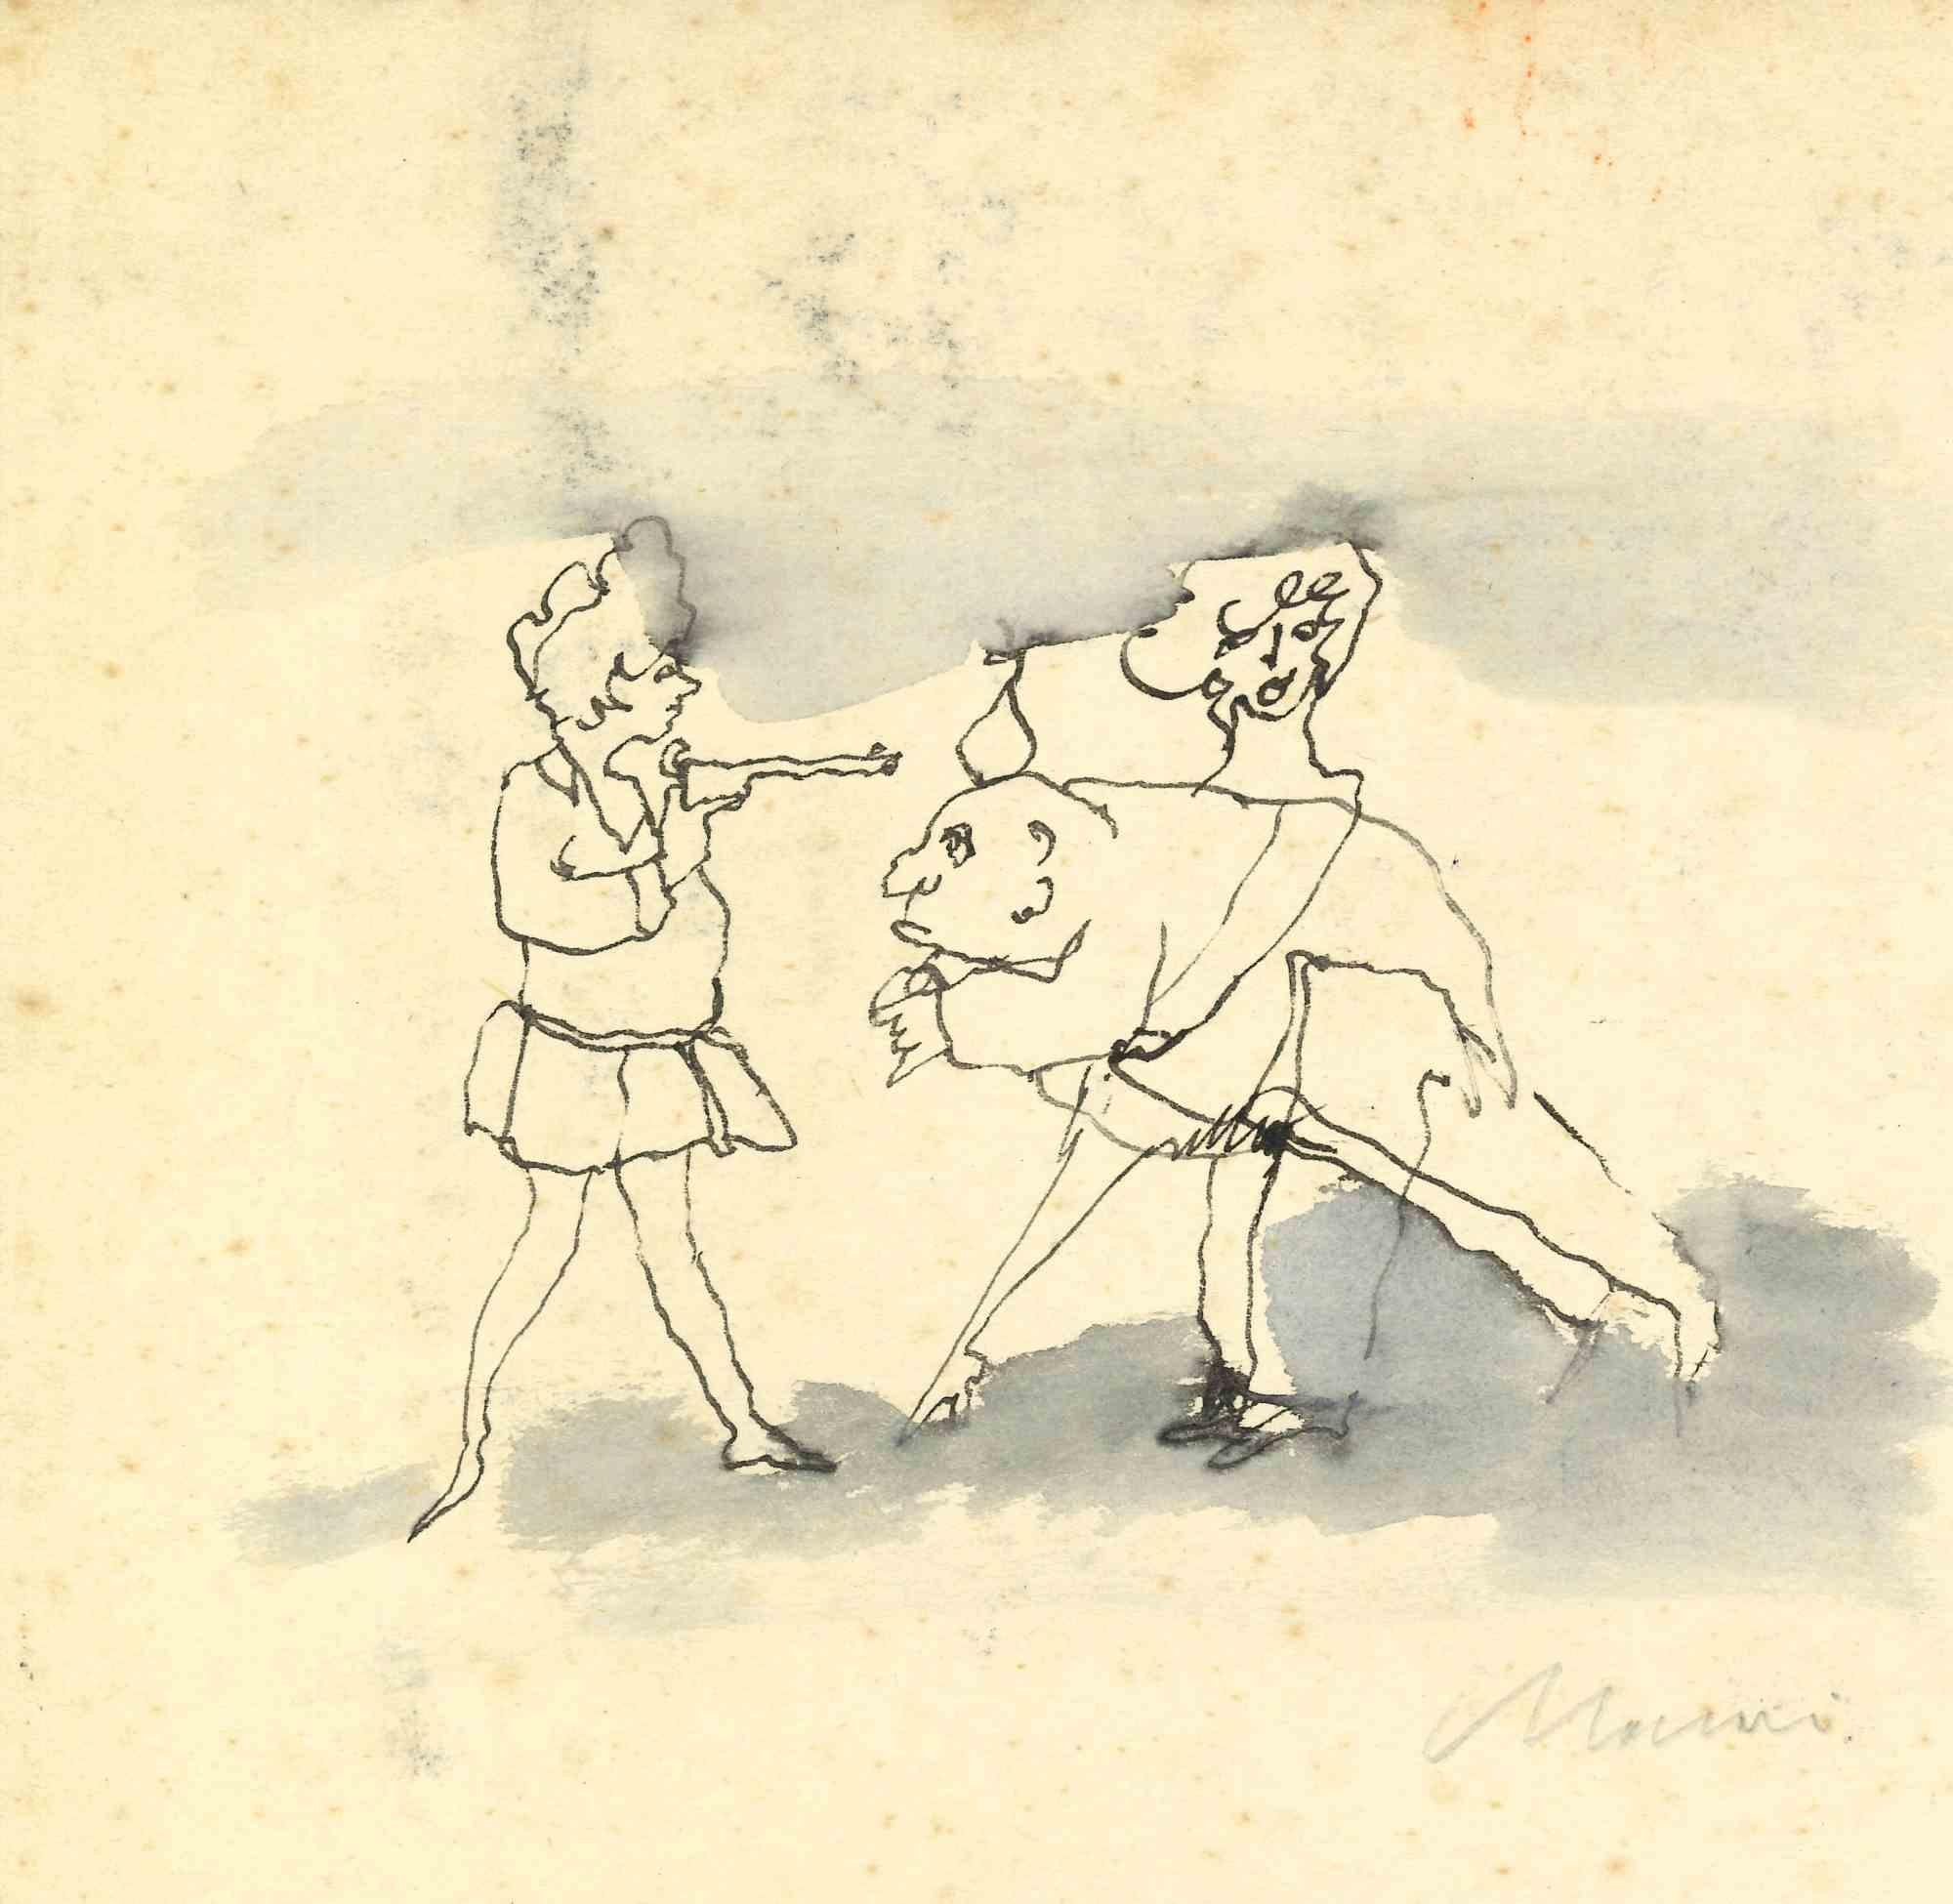 Sister and Sister in Law is a China ink Drawing realized by Mino Maccari  (1924-1989) in the Mid-20th Century.

Hand-signed on the lower.

Good conditions.

Mino Maccari (Siena, 1924-Rome, June 16, 1989) was an Italian writer, painter, engraver and